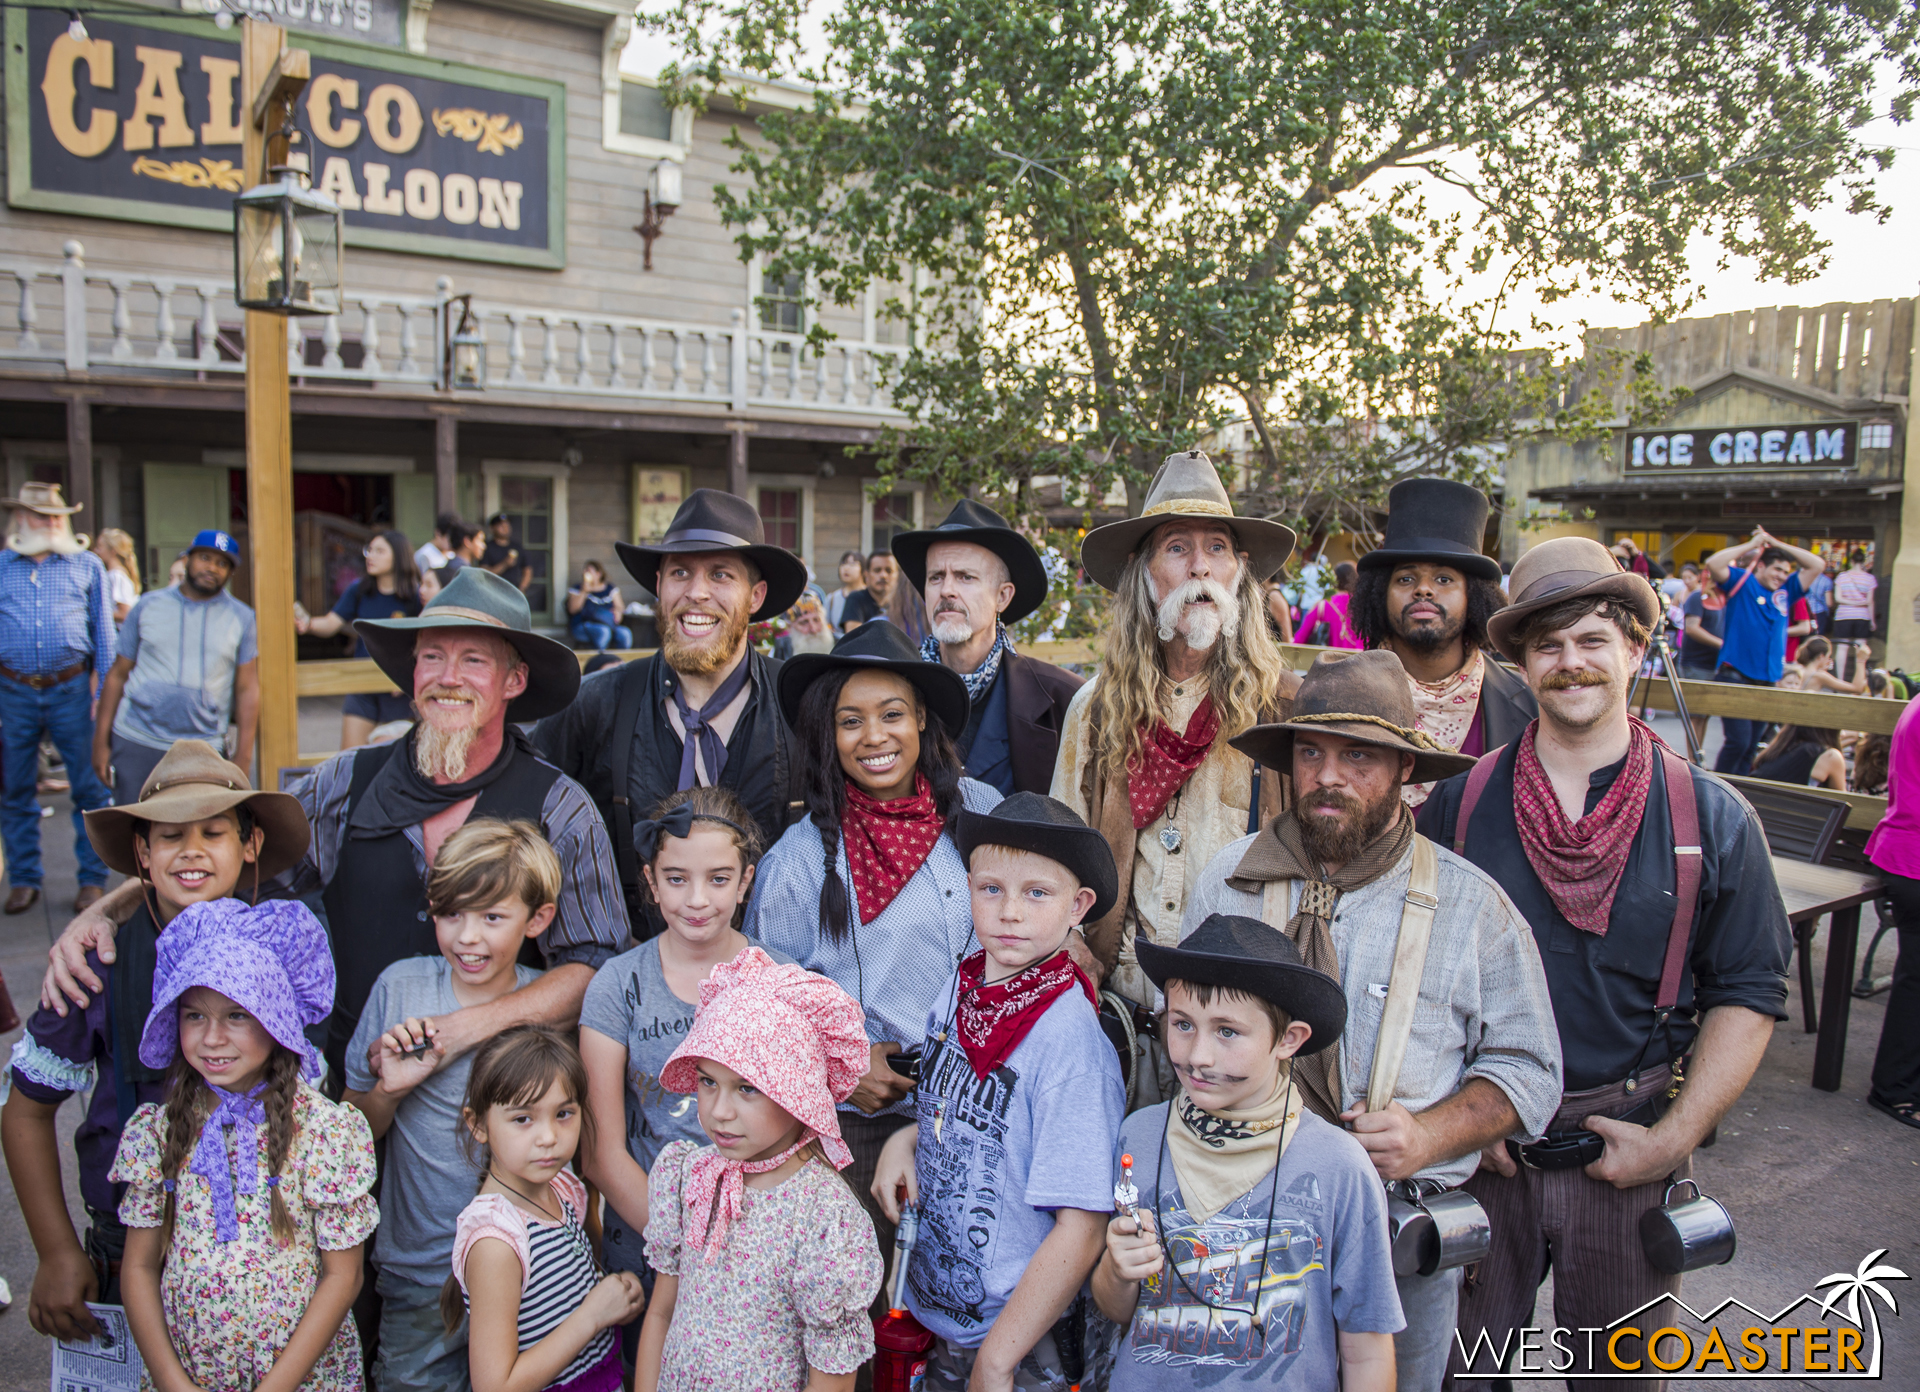  The Mayfield Gang (including newly discovered member Dillard Marsh) pose for a group photo with guests. 